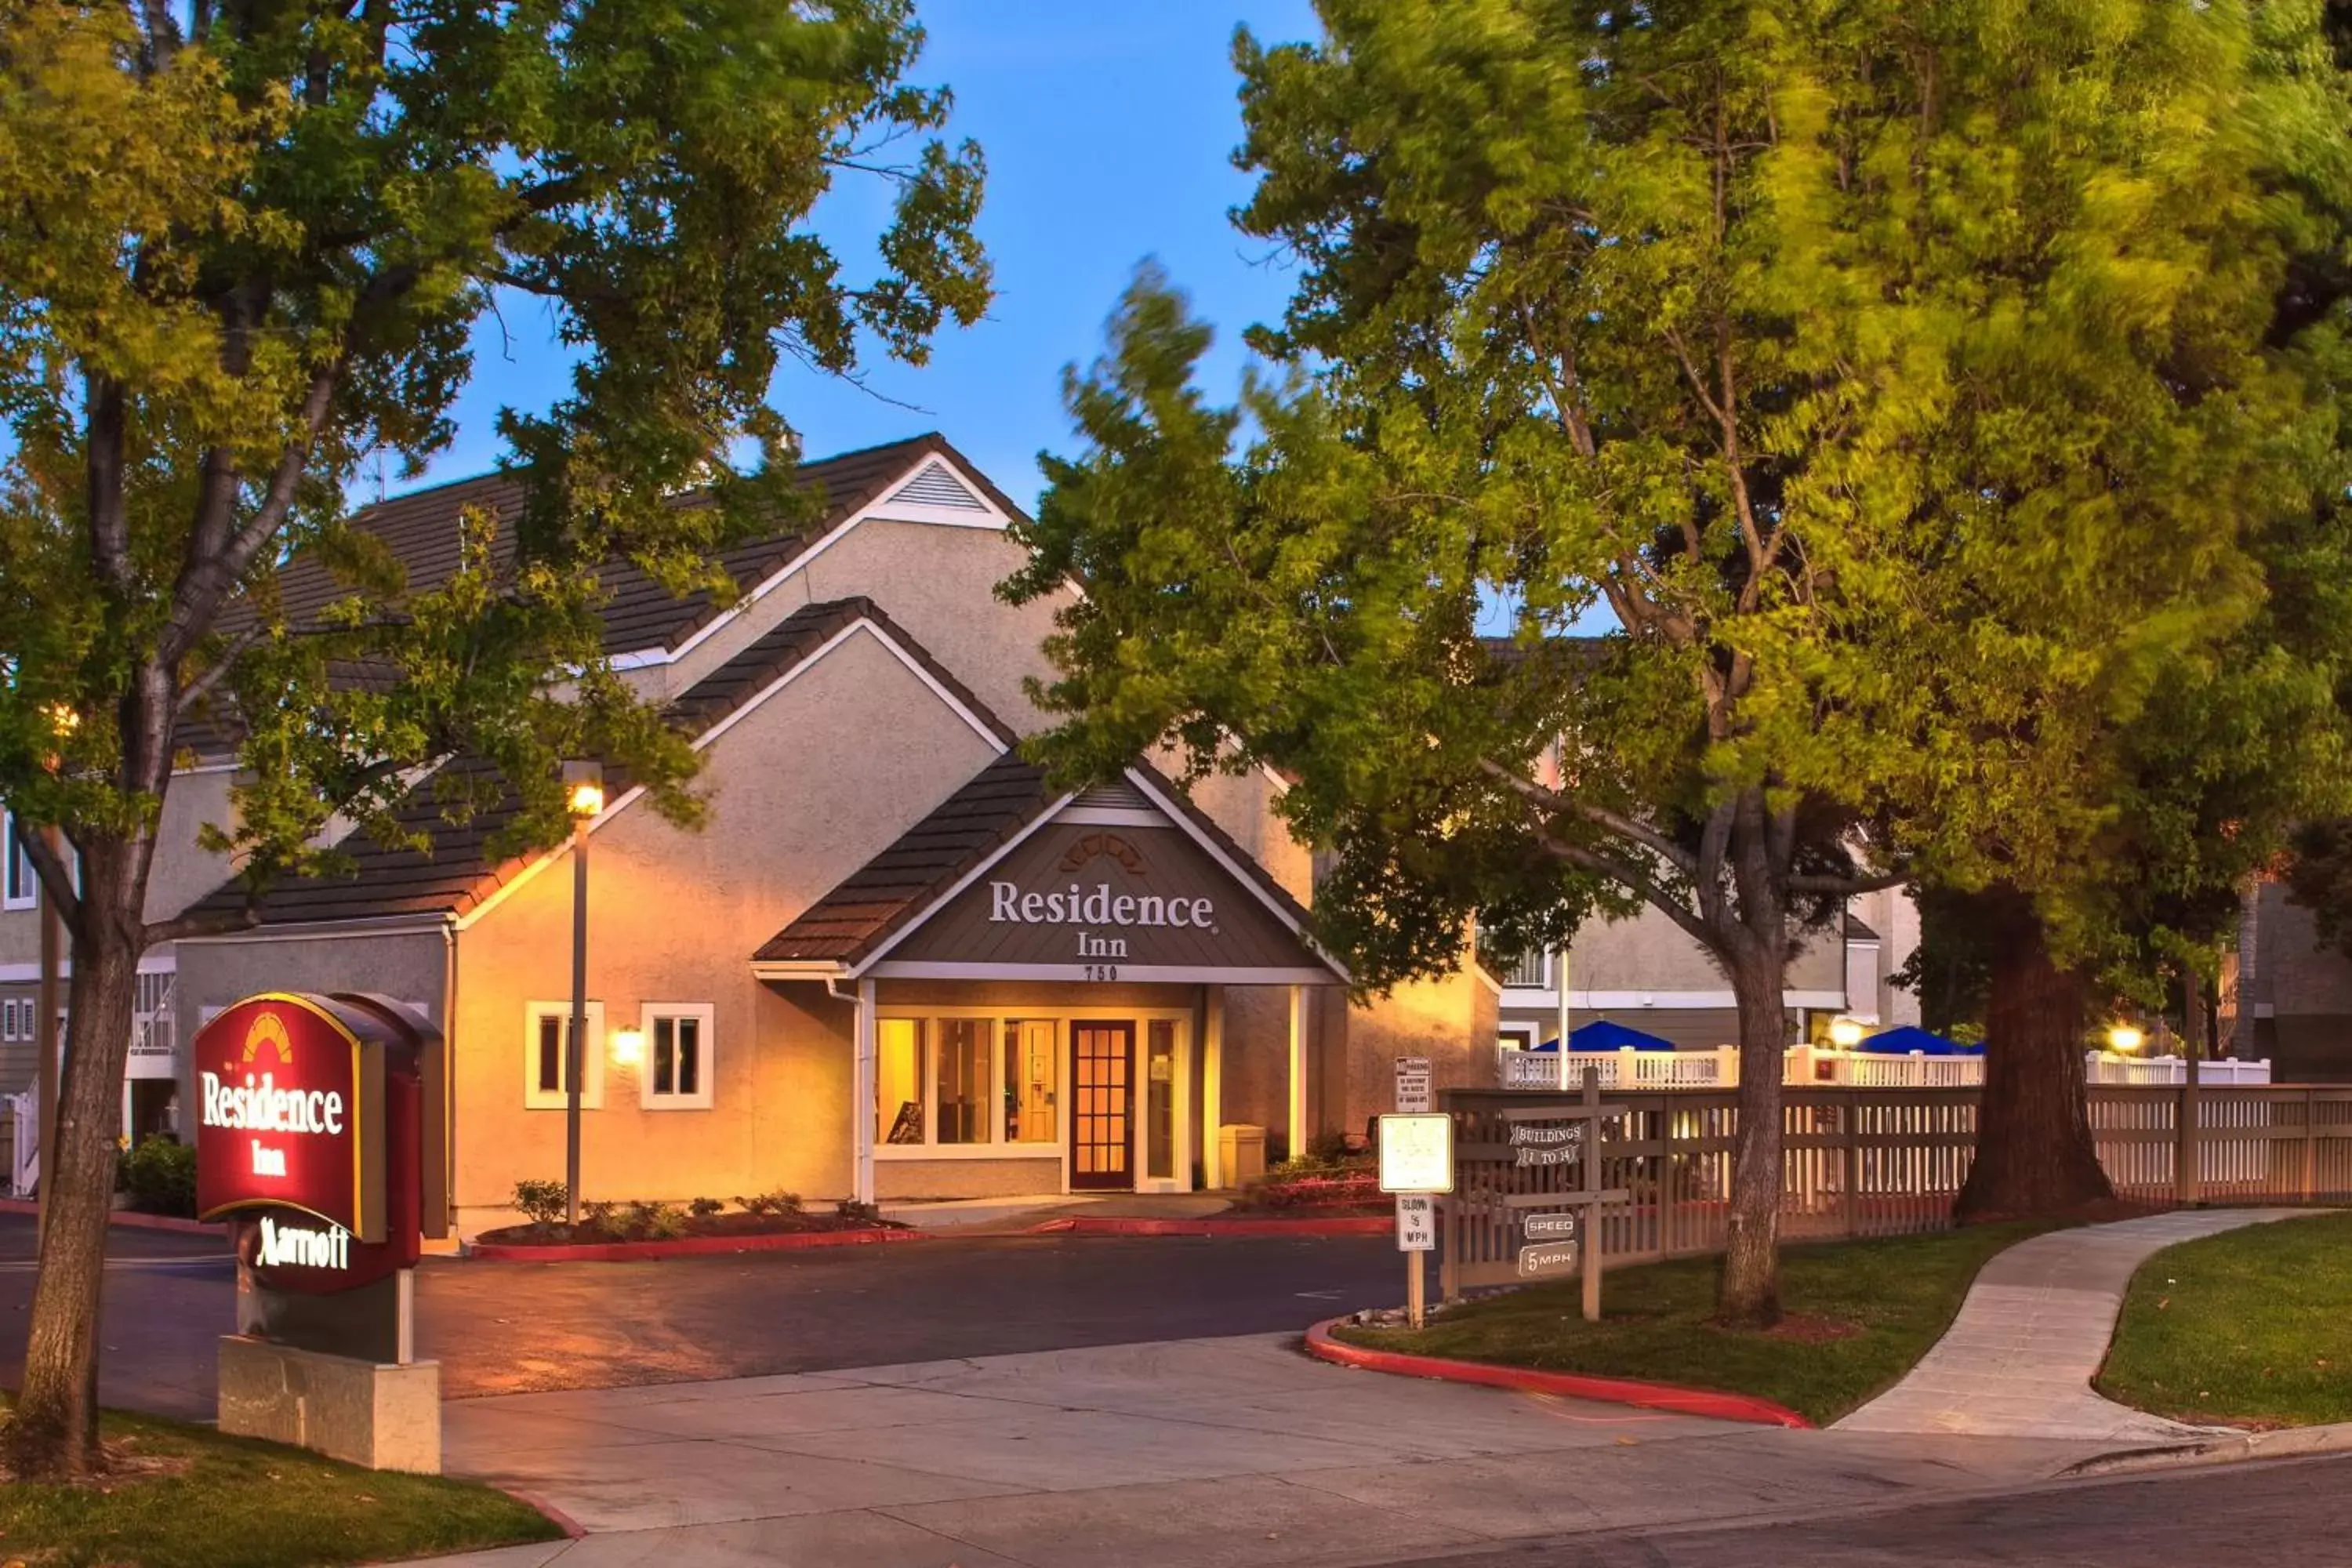 Property Building in Residence Inn Sunnyvale Silicon Valley I